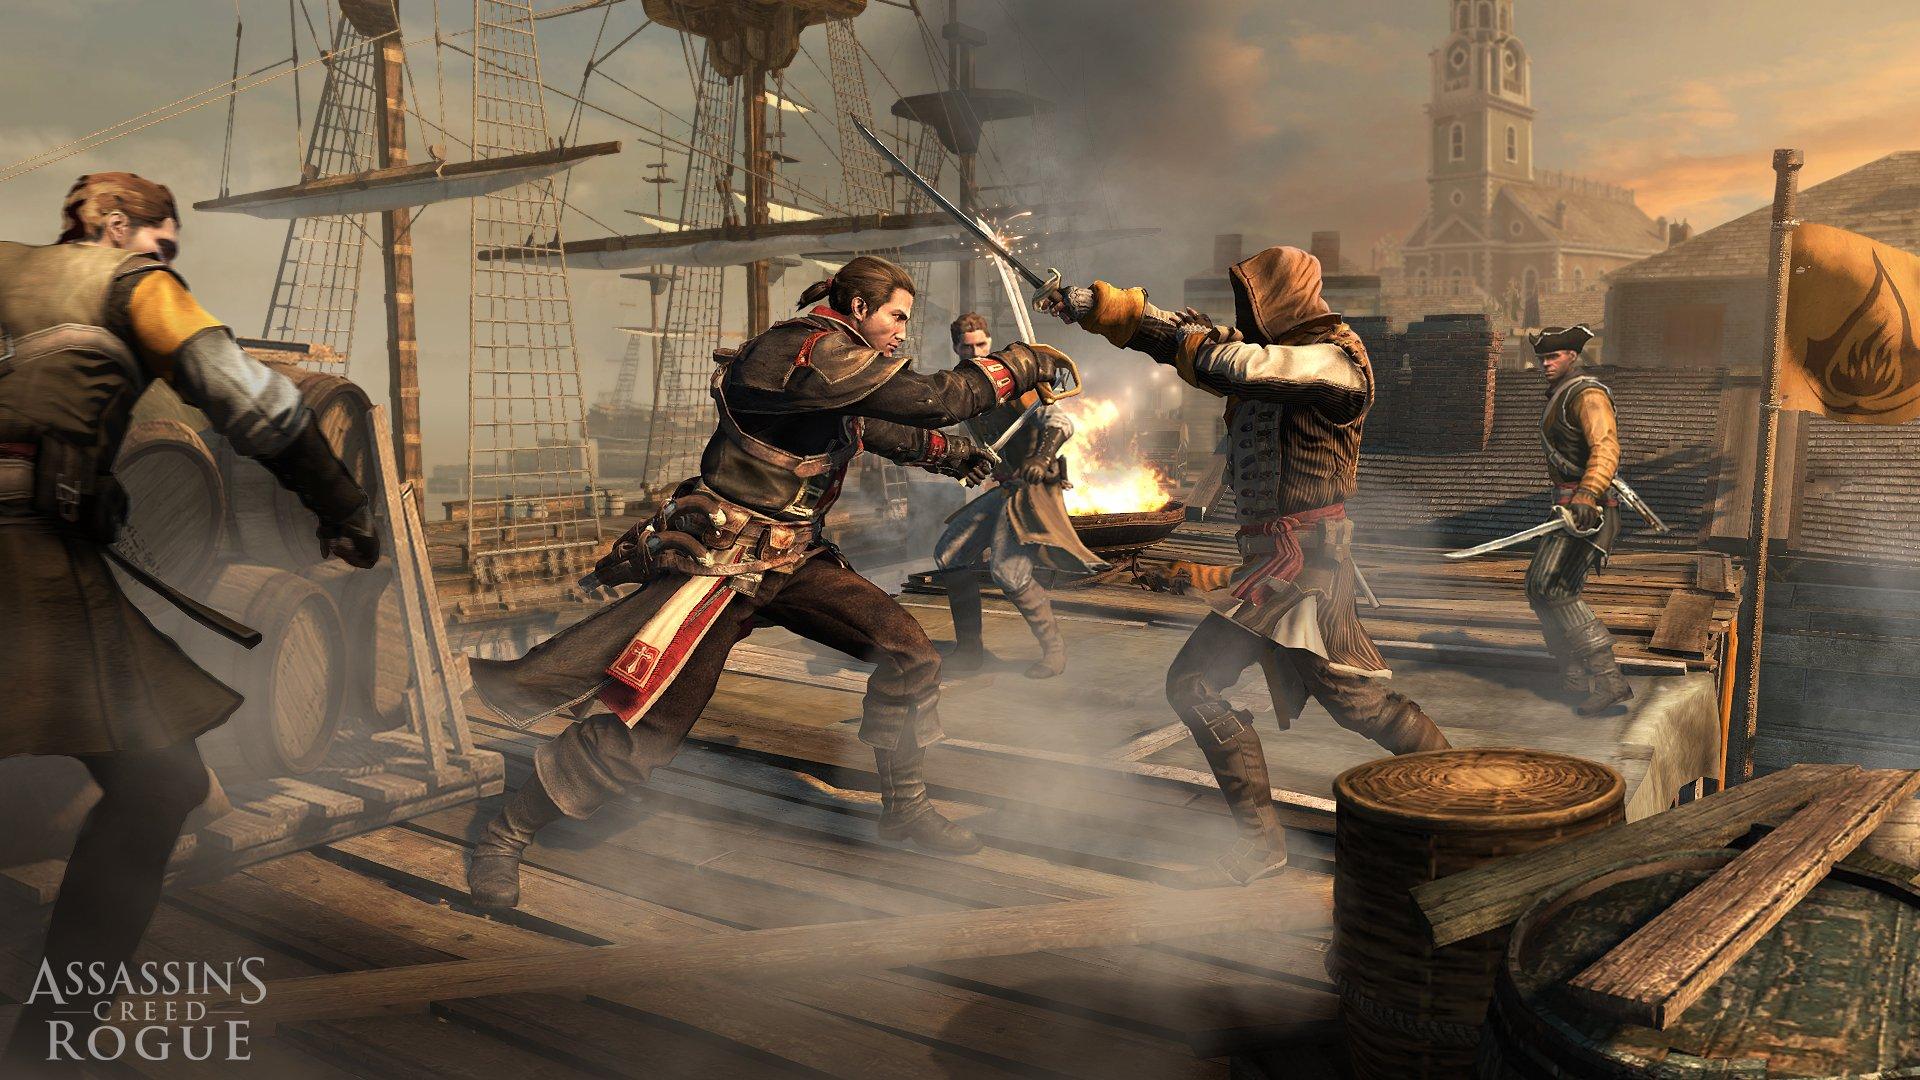 list item 2 of 6 Assassin's Creed Rogue